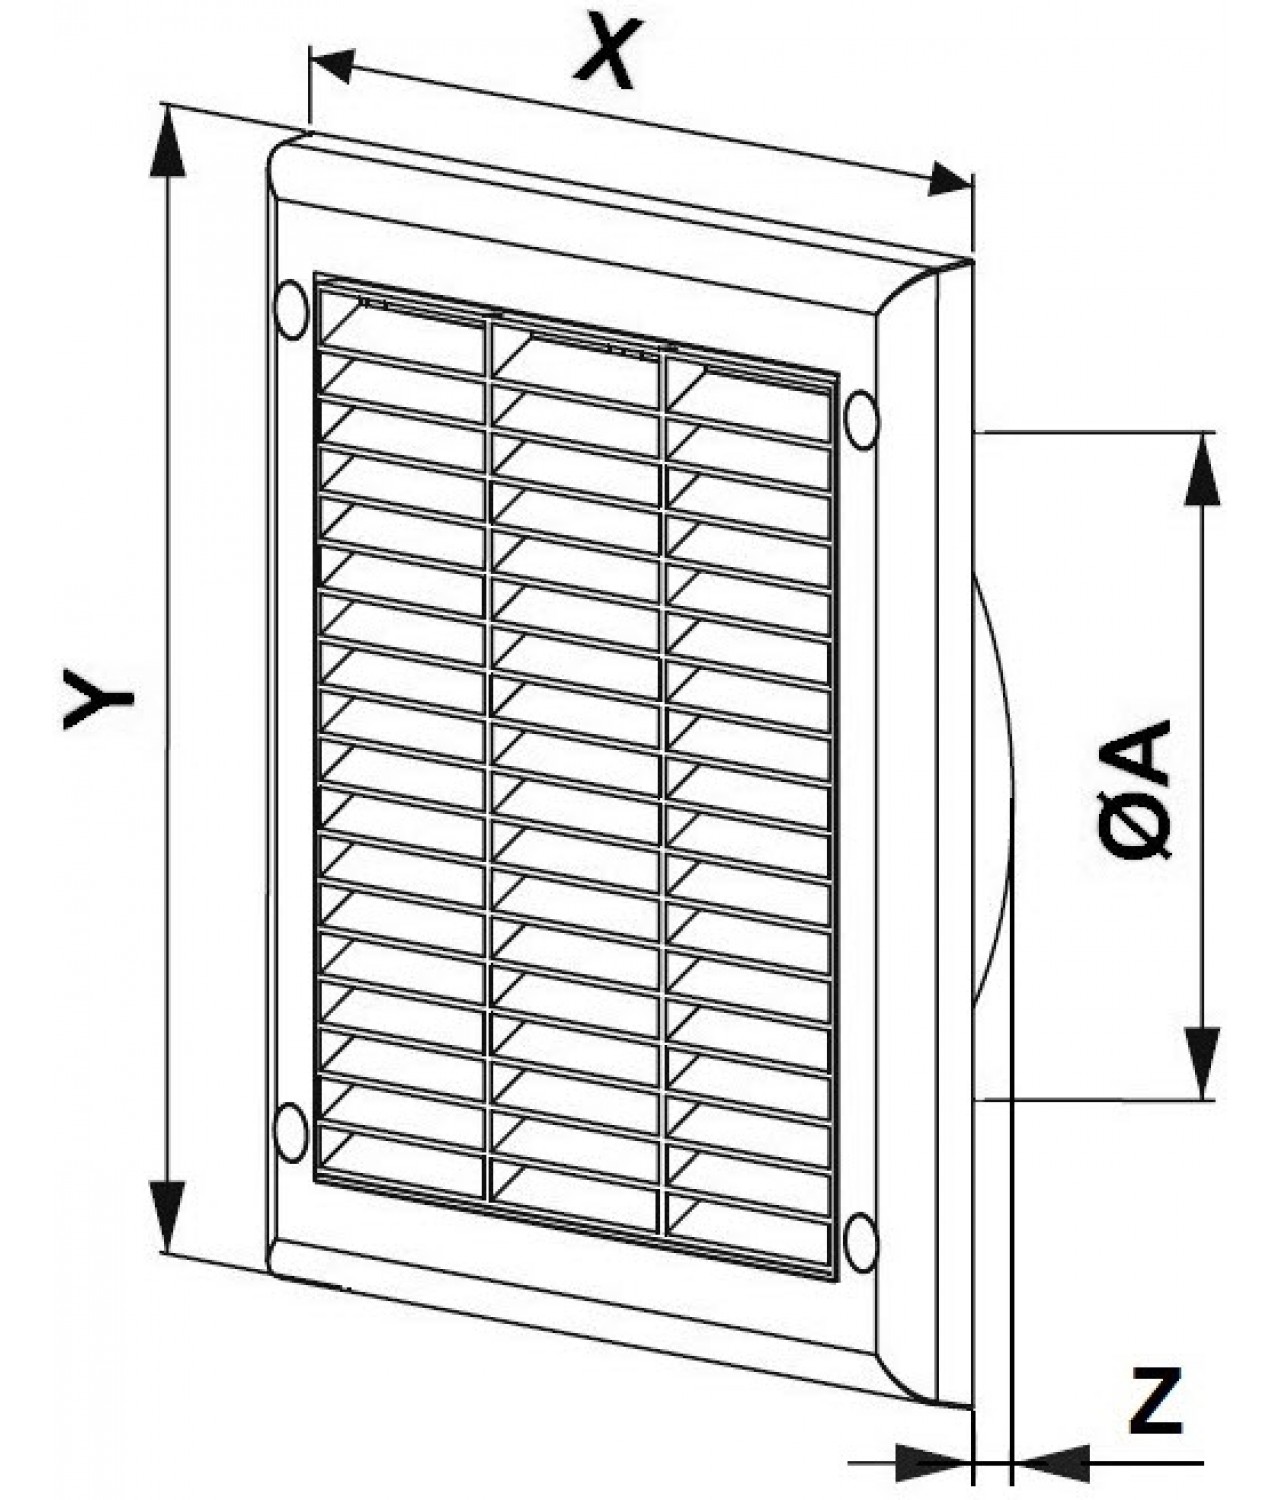 Ventilation grille with shutter GRTK10, 190x190 mm, Ø100 mm - drawing